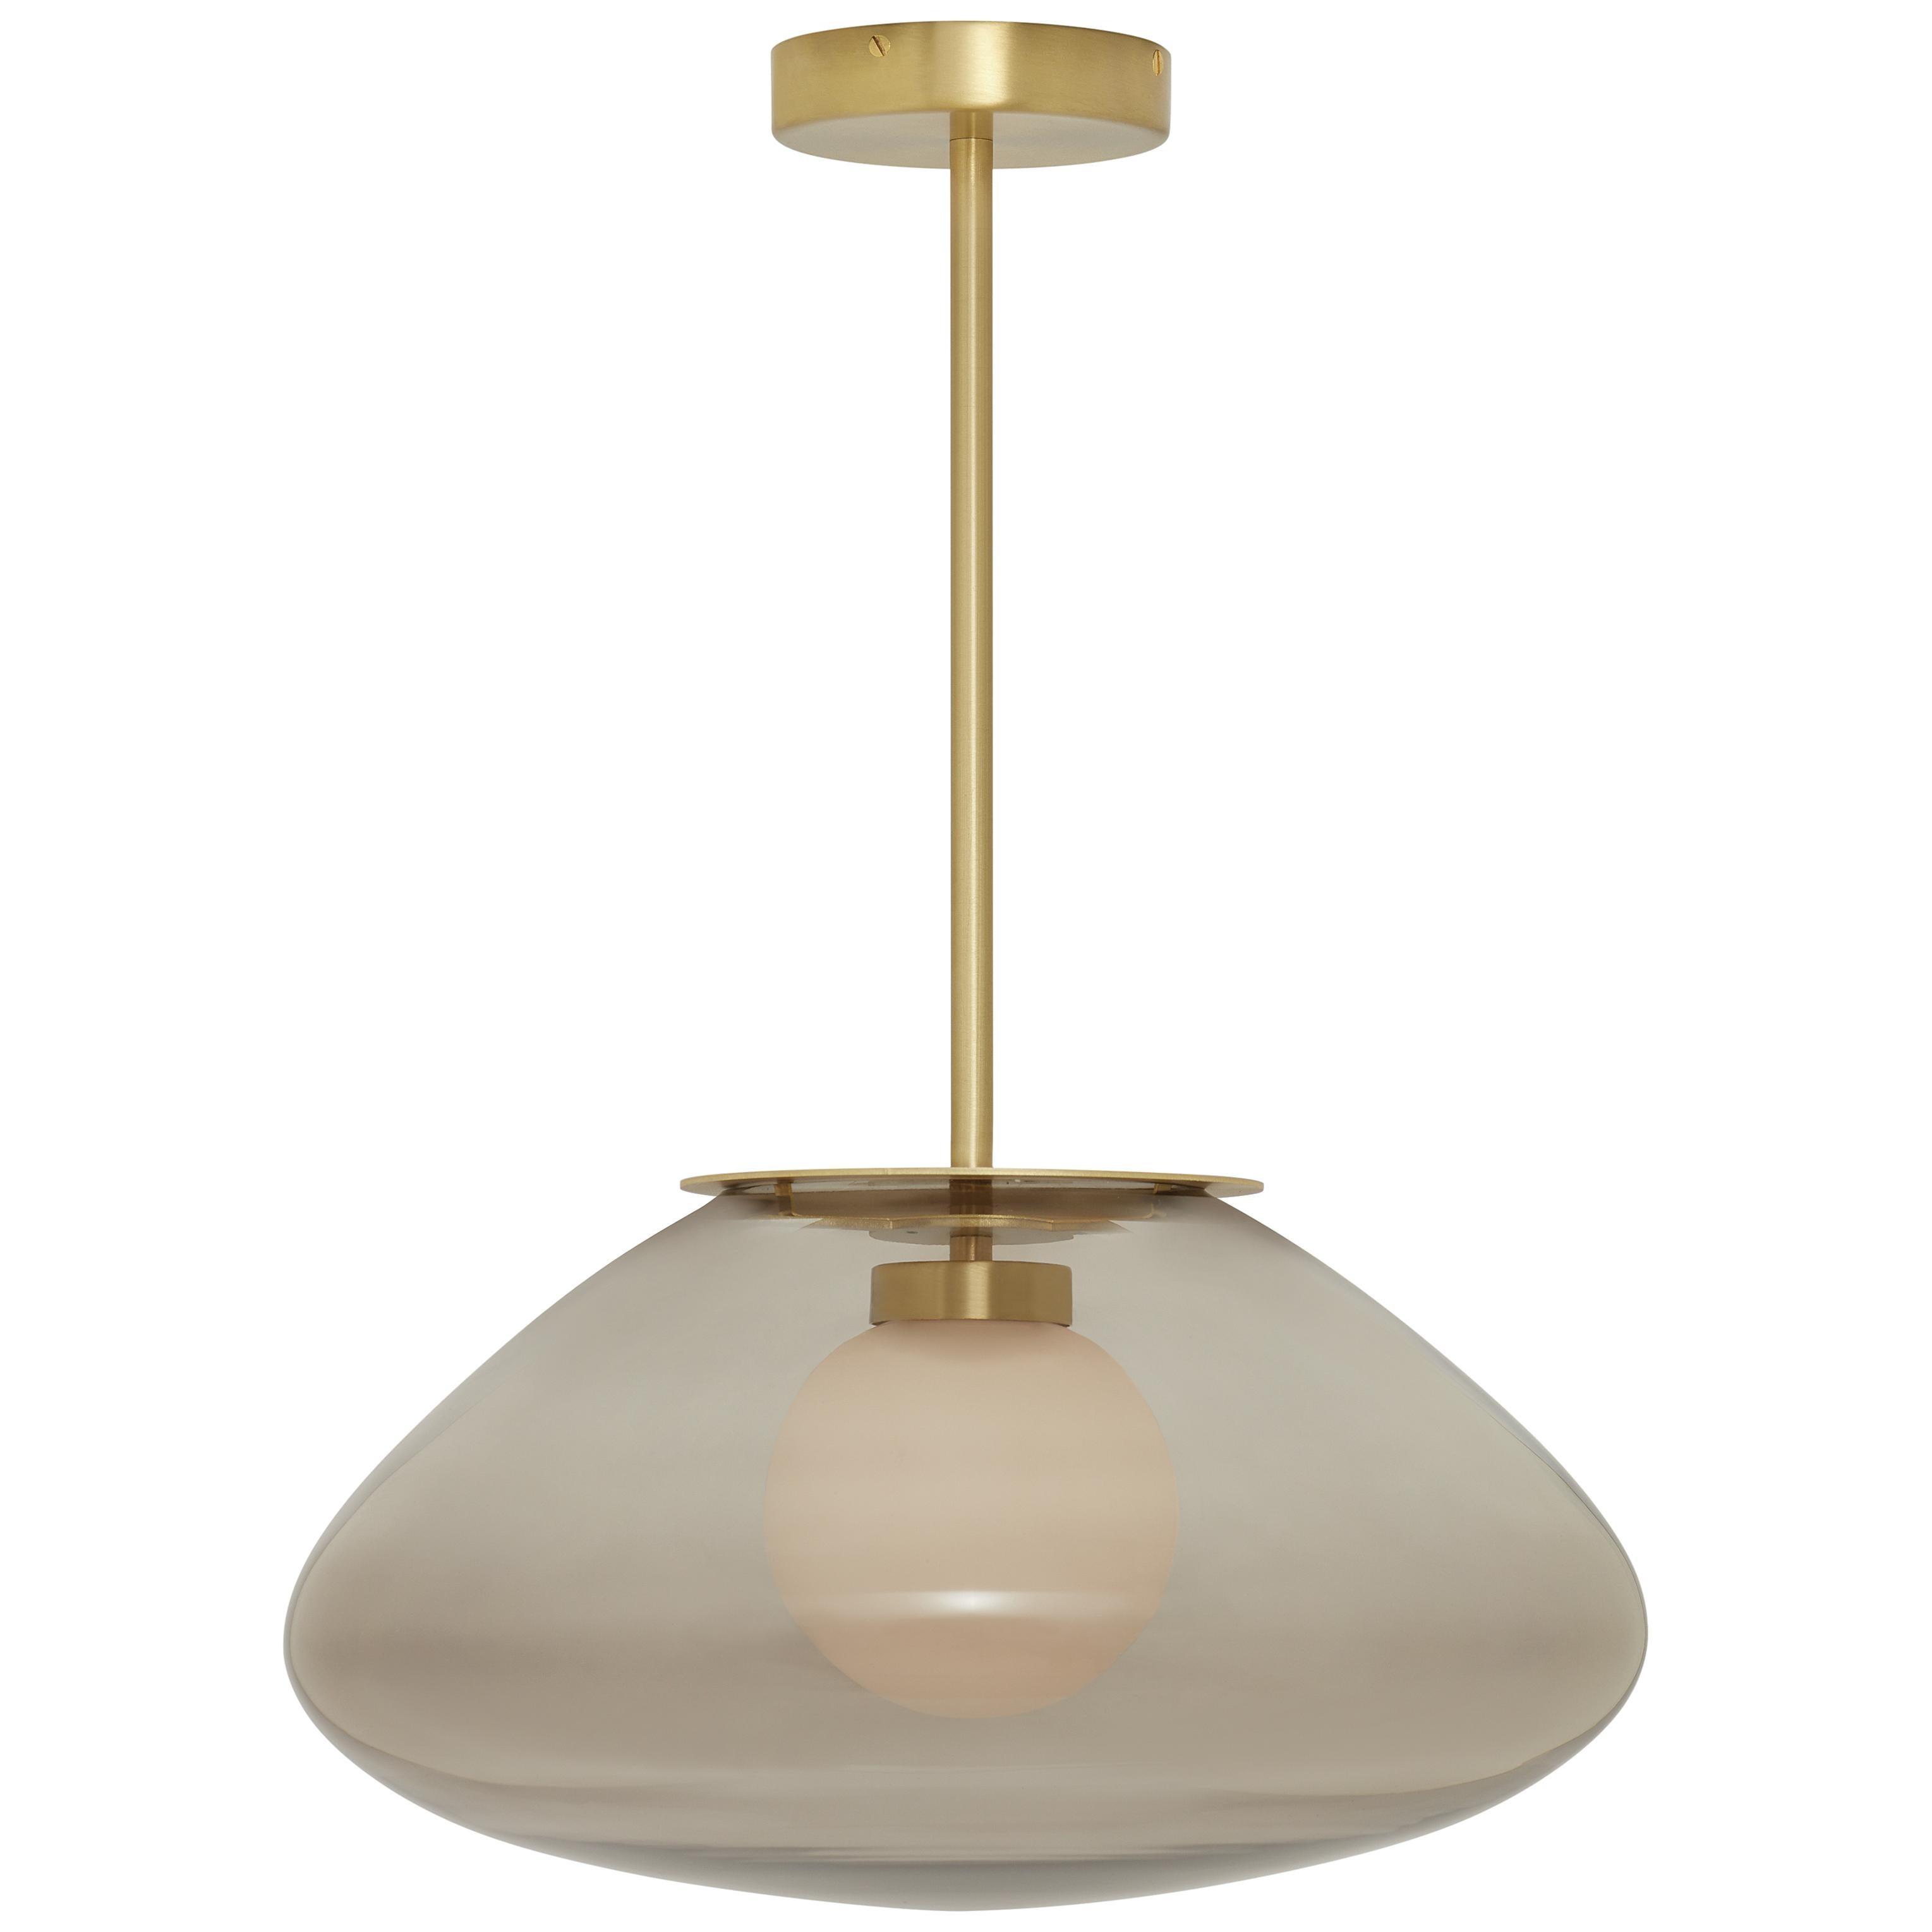 Petra small pendant by CTO Lighting
Materials: satin brass with smoked glass shade and hand shaped smoked glass inner shade
Also available in dark bronze with smoked glass shade and hand shaped smoked glass inner shade,
satin brass with smoked glass